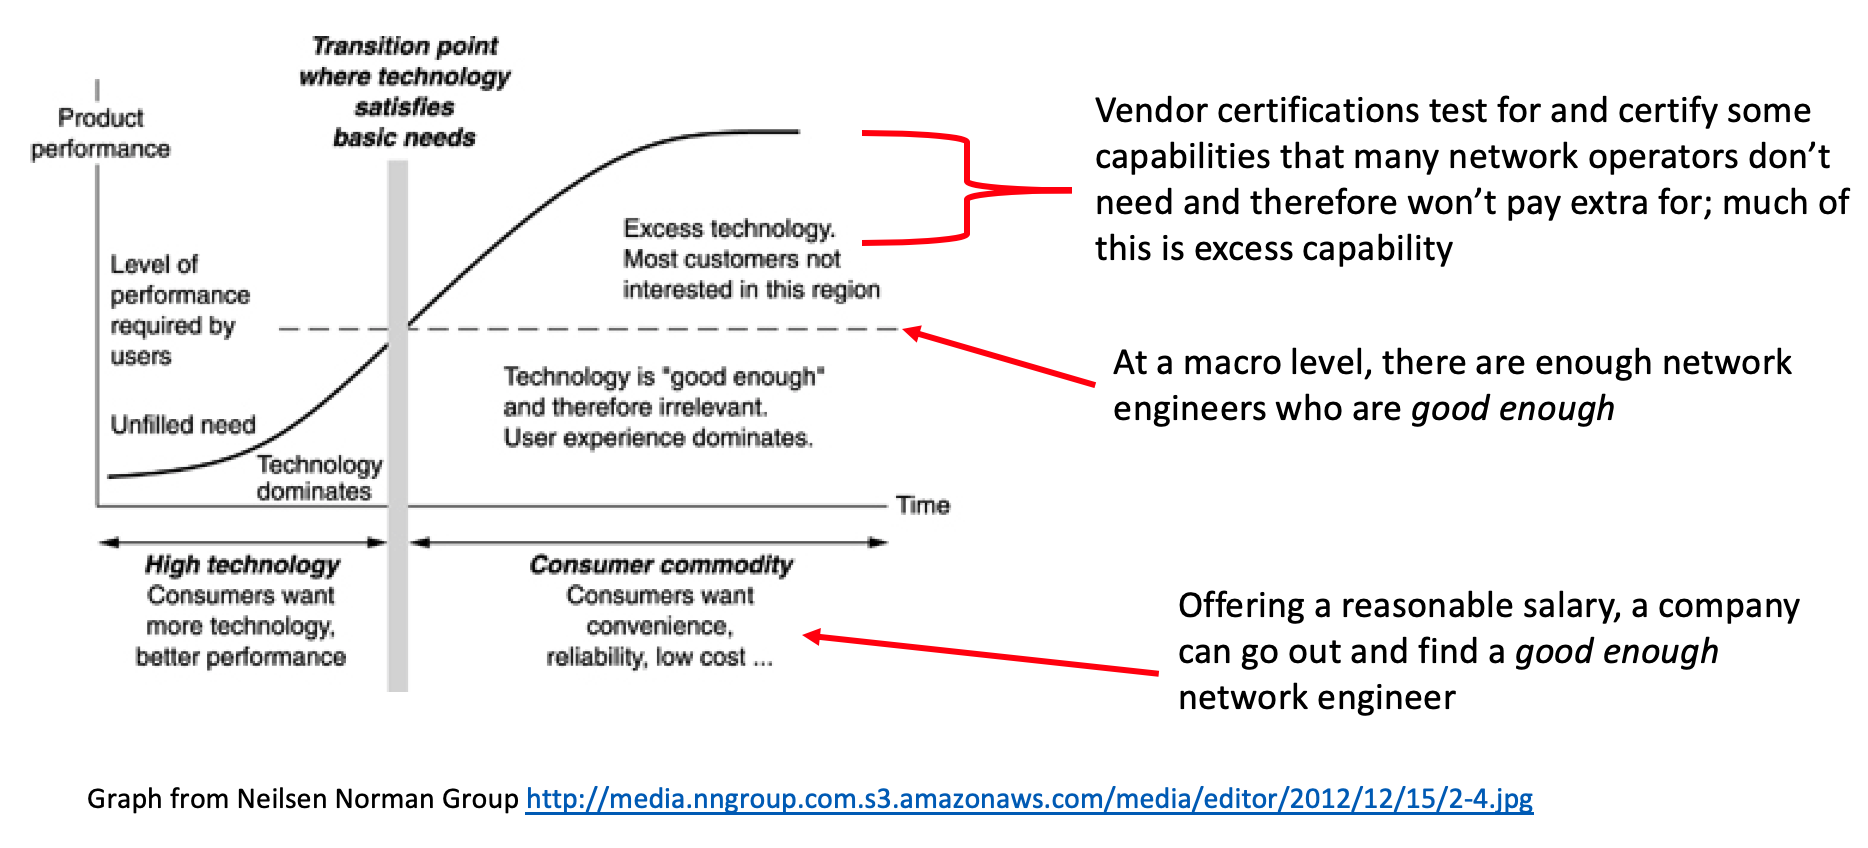 Most network engineers are at least 'good enough', which characterizes a commoditized market